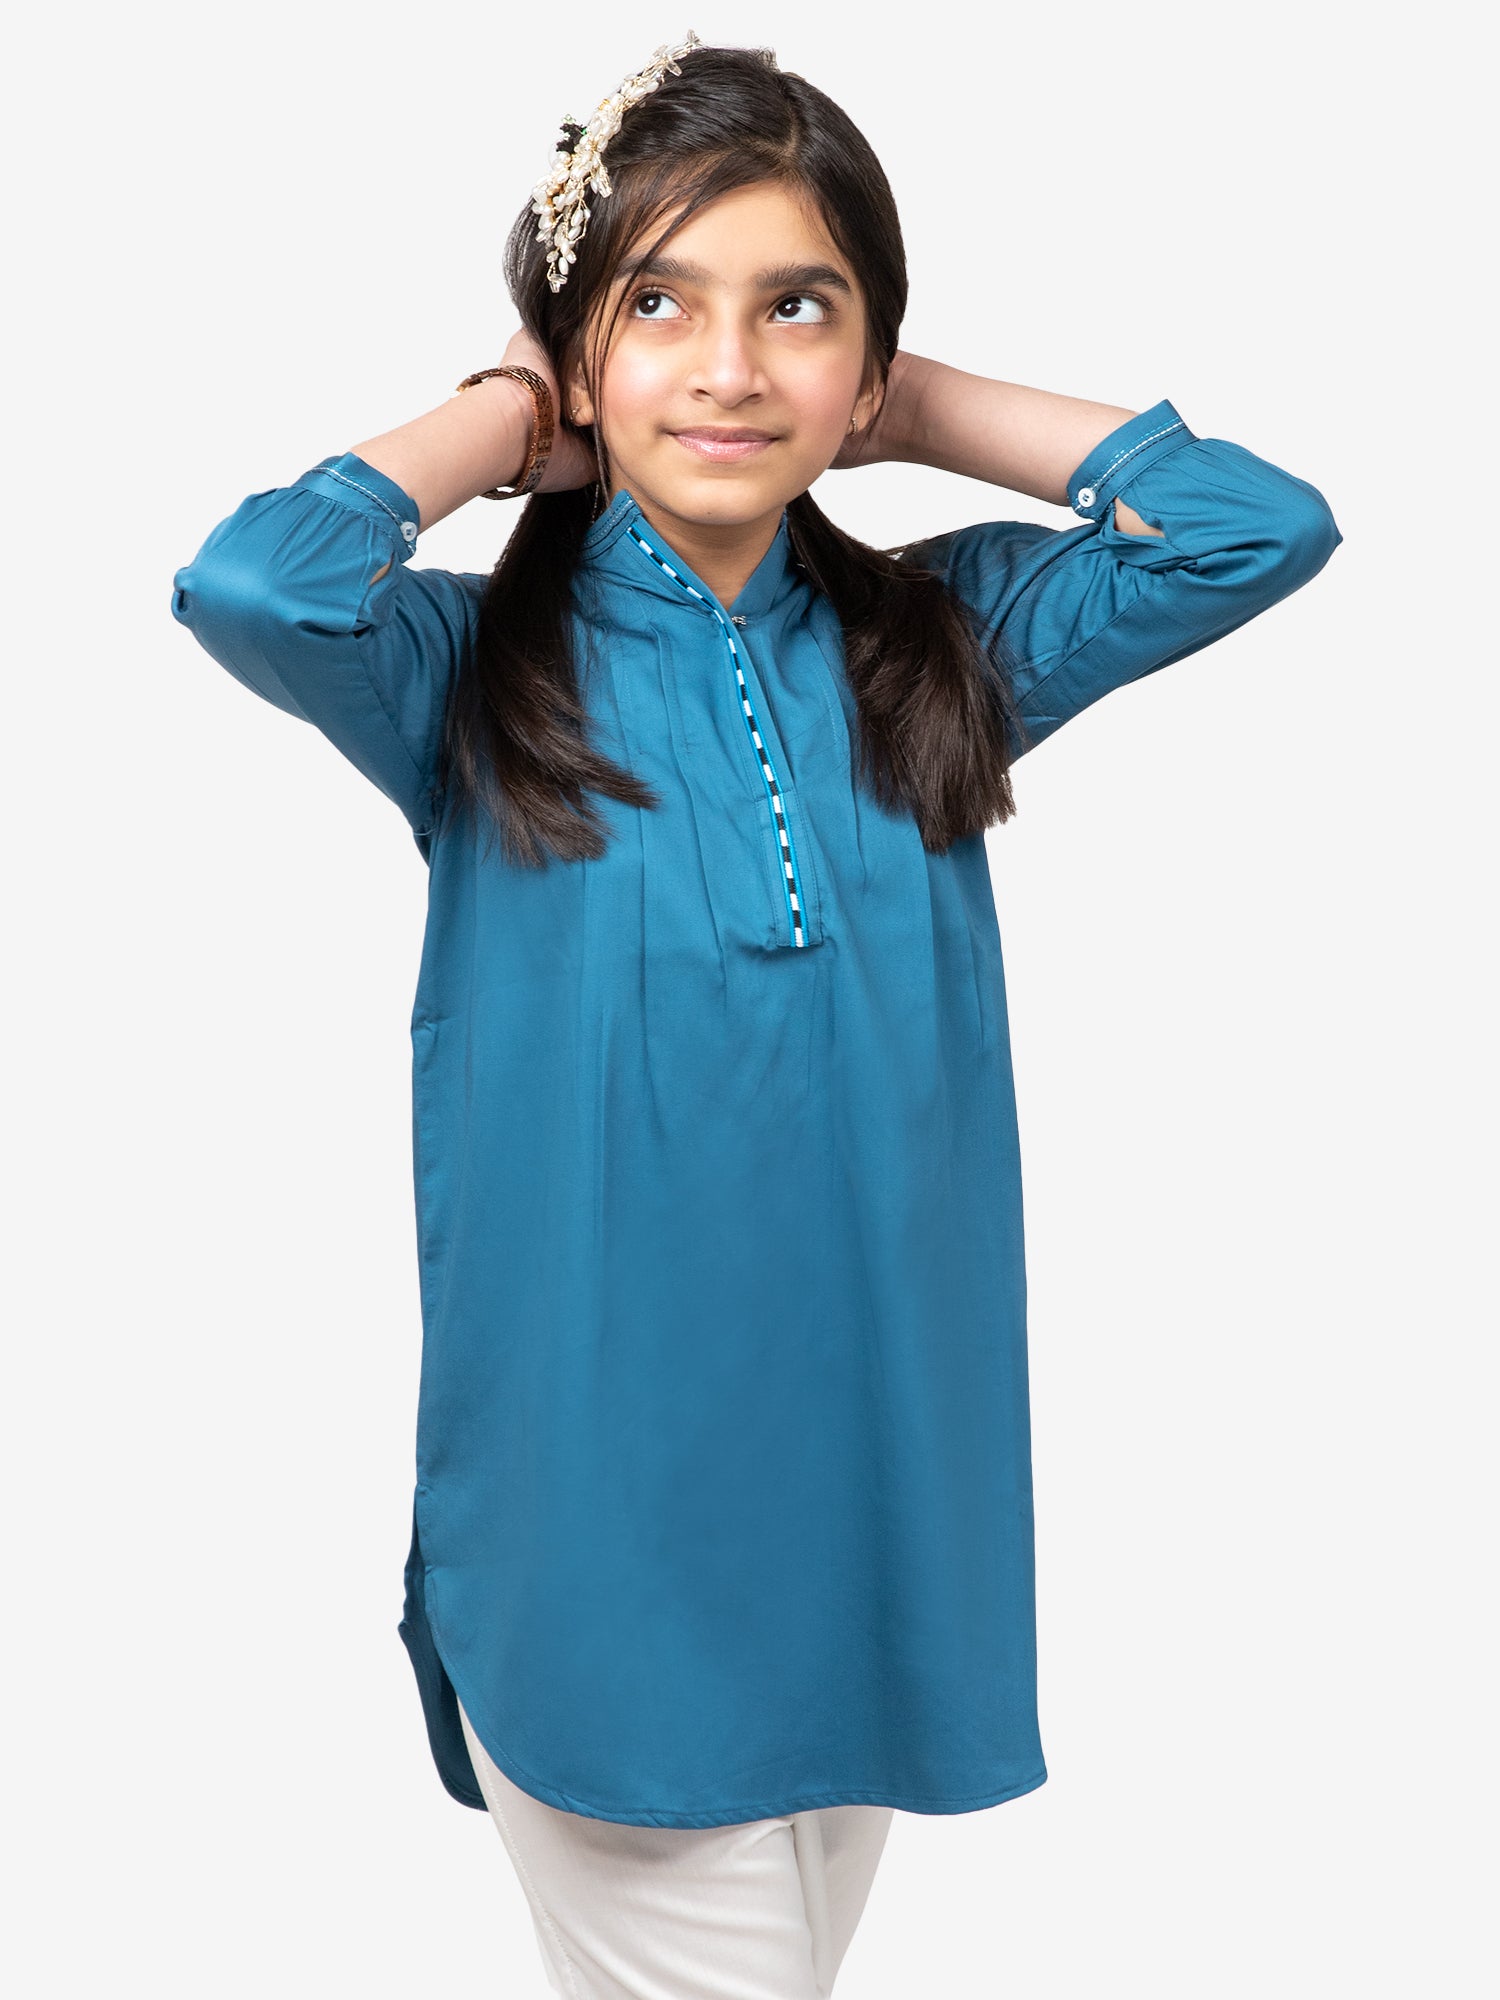 Girls Tunic Top By Velvour ART# VG0018-B - Velvour Shop